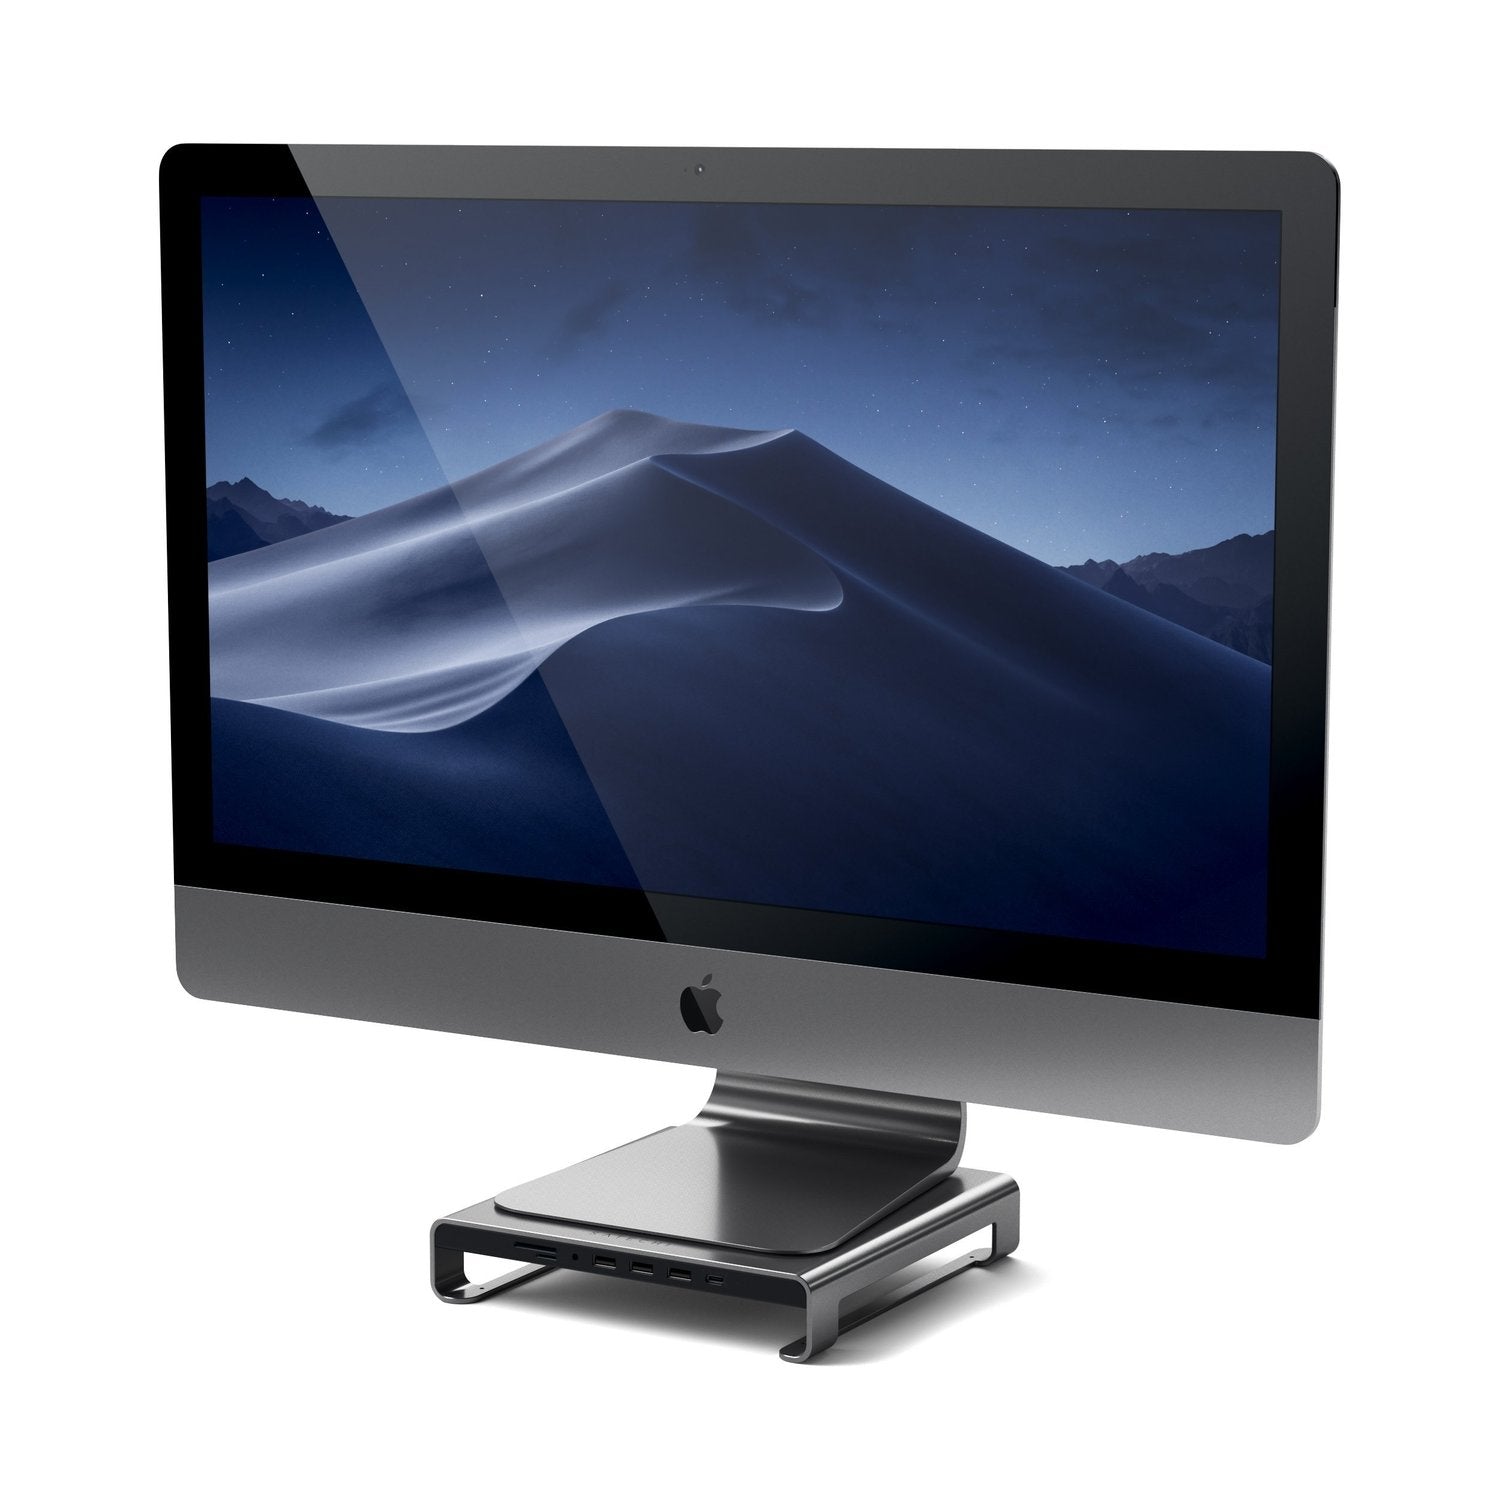 Satechi USB-C Aluminium Monitor Stand Hub for iMac (Space Grey) The Satechi Type-C Aluminium Monitor Stand Hub for iMac is your perfect 2-in-1 solution to enhance and elevate your desk space. Featuring built-in USB 3.0 ports, USB-C data port, micro/SD car